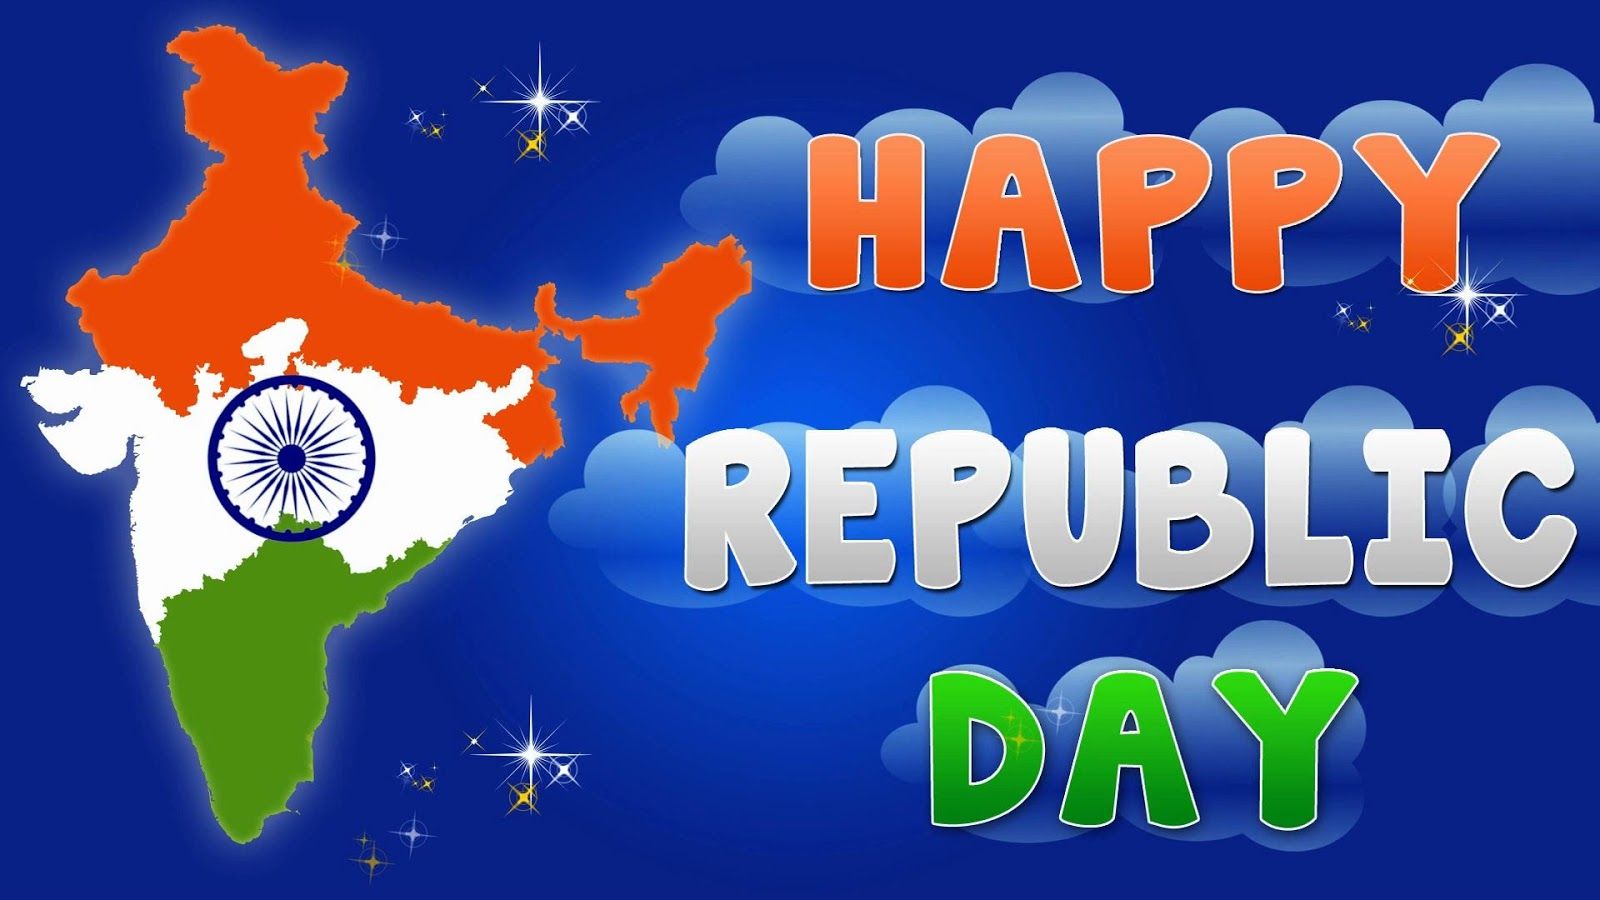 Happy Republic Day 2021 Wishes, Image, Greetings, Quotes Happy Republic Day 2021 Image, Quotes, Speech, Poems, Slogans